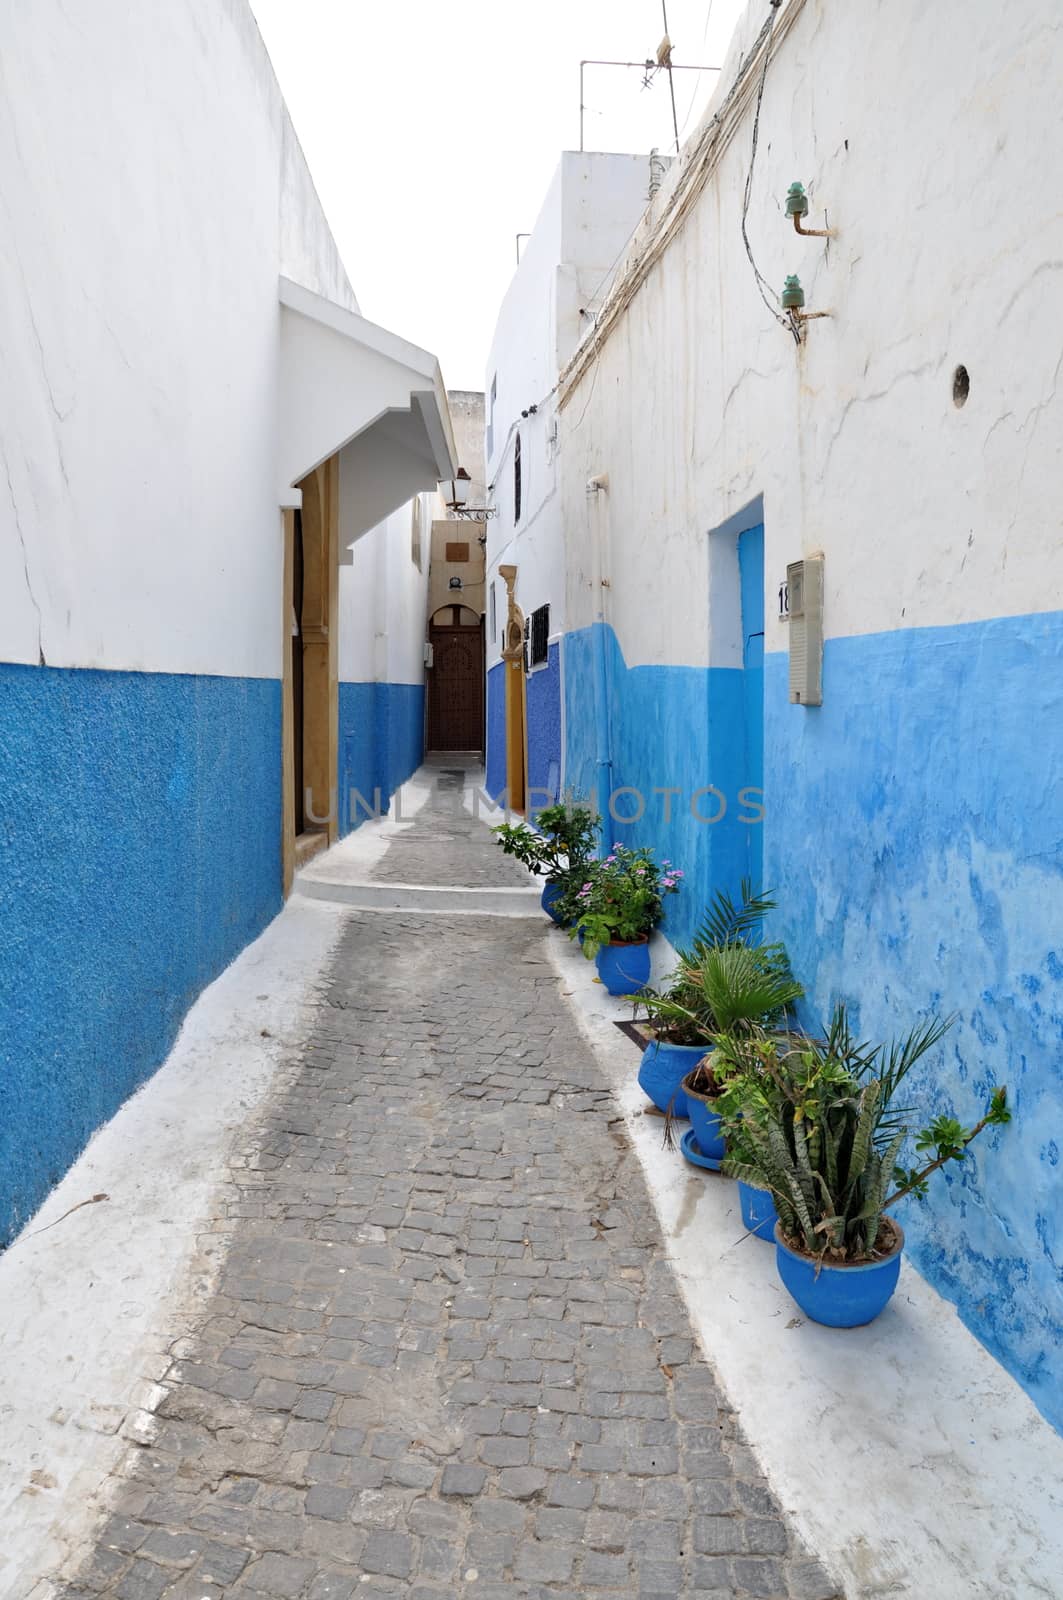 Streets of Rabat, Morocco by anderm